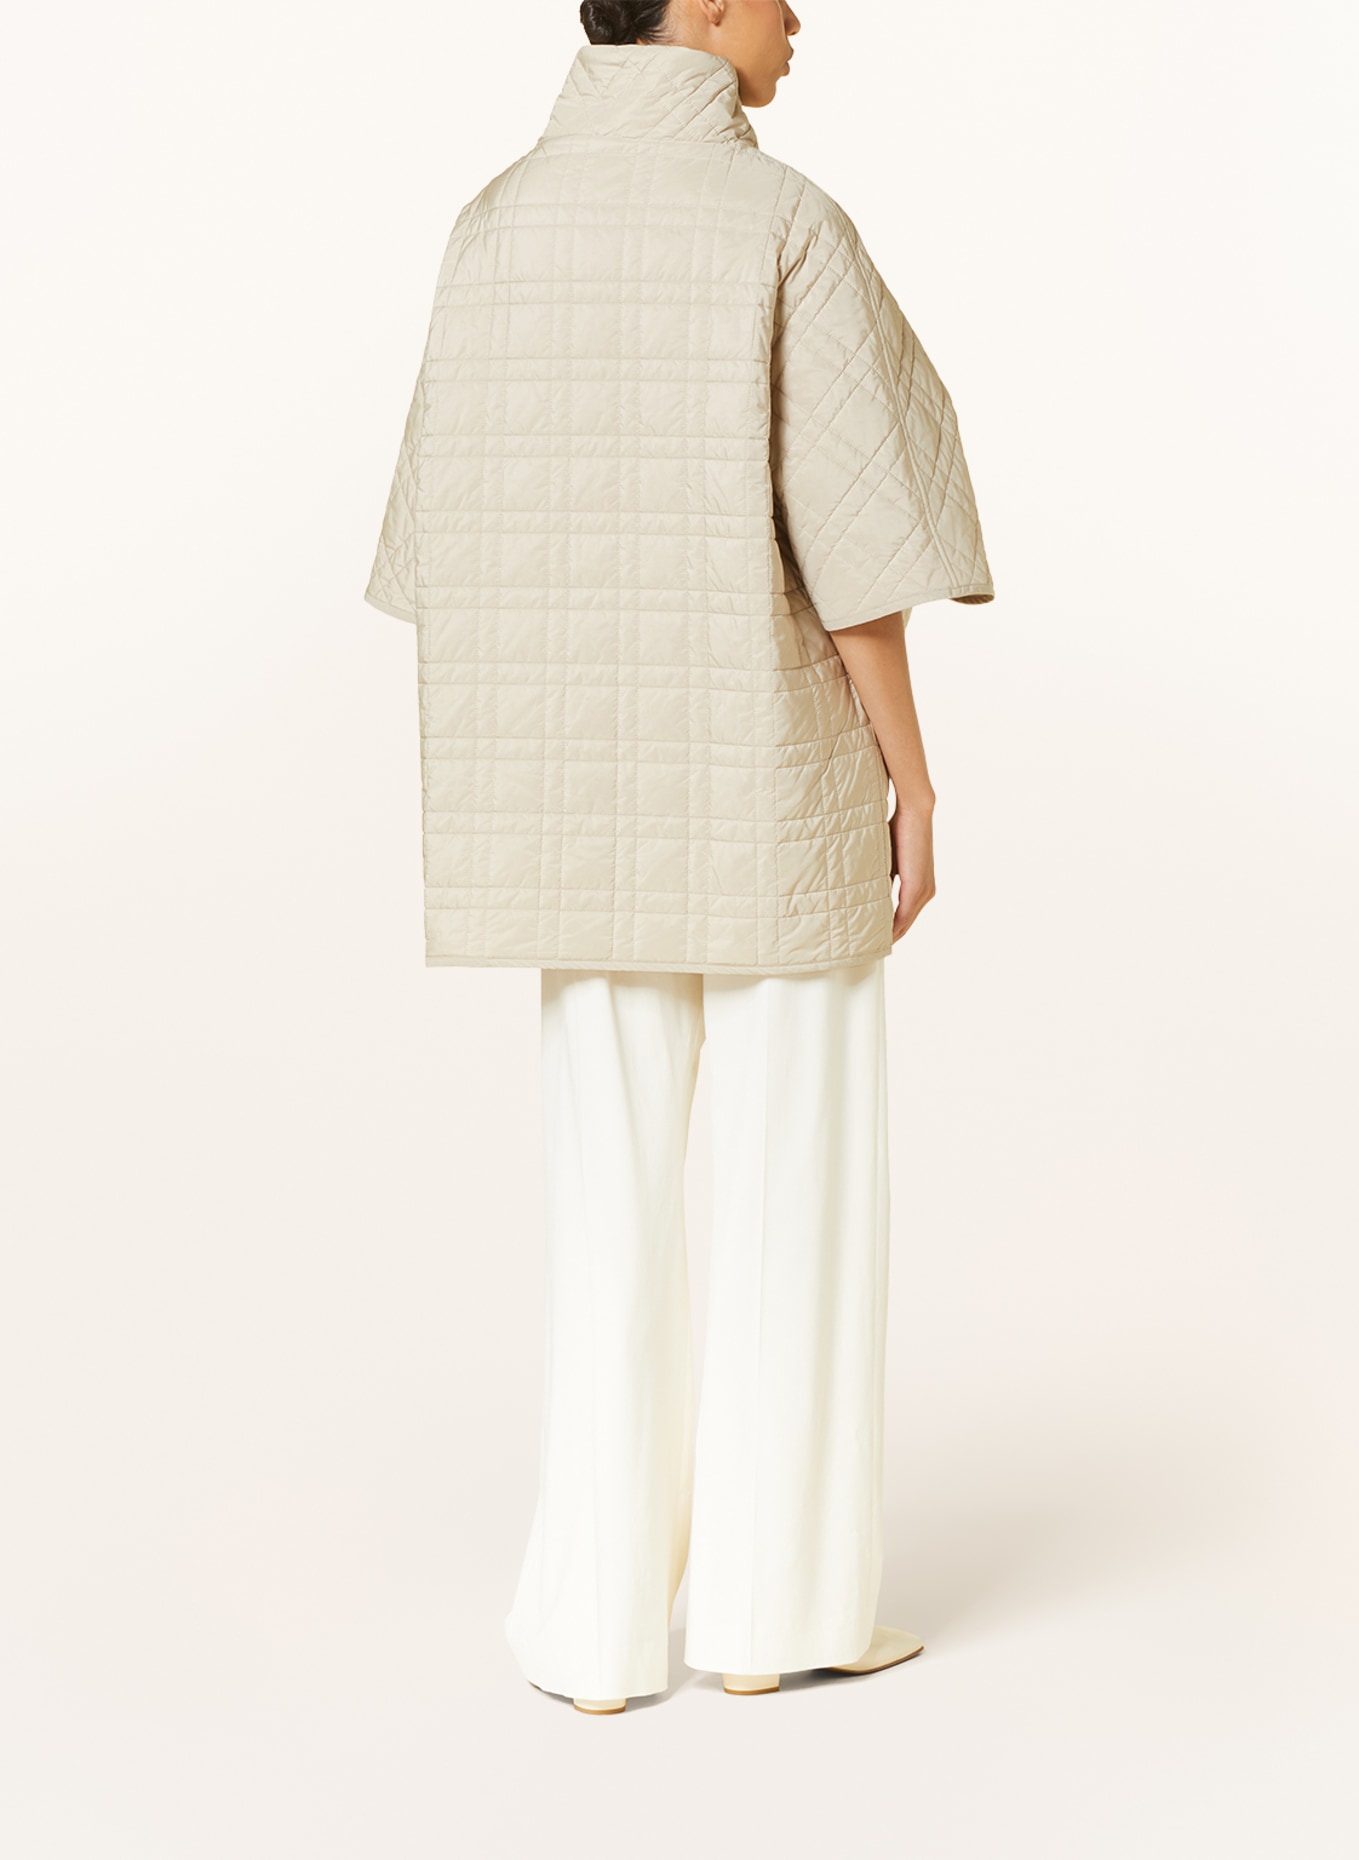 FABIANA FILIPPI Quilted coat with 3/4 sleeves, Color: CREAM (Image 3)